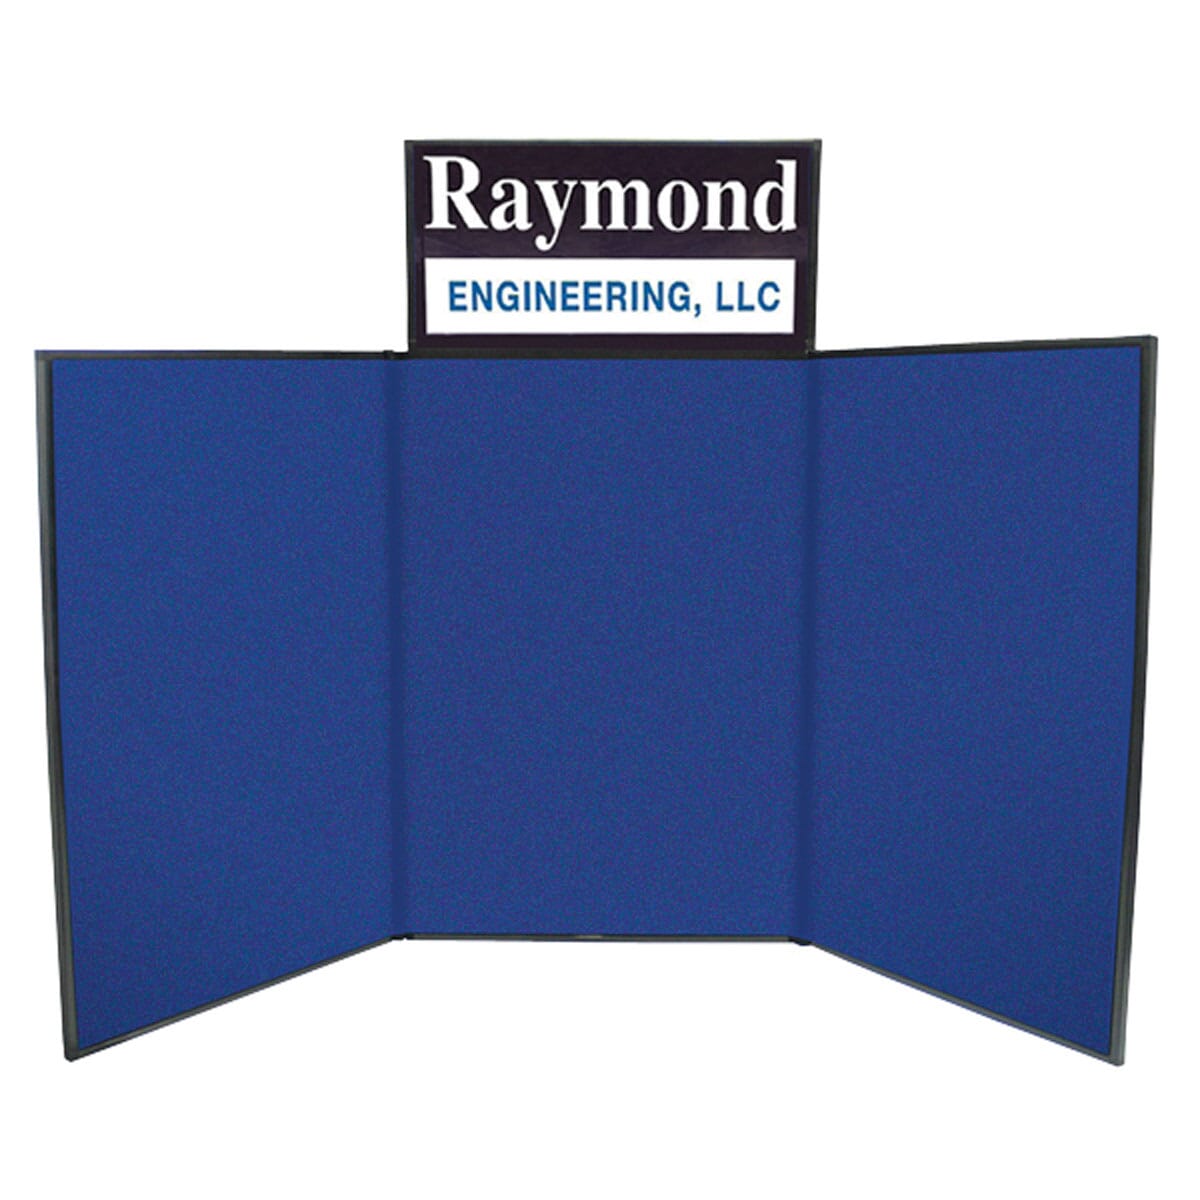 6’ Tabletop Trifold Display Board with Header